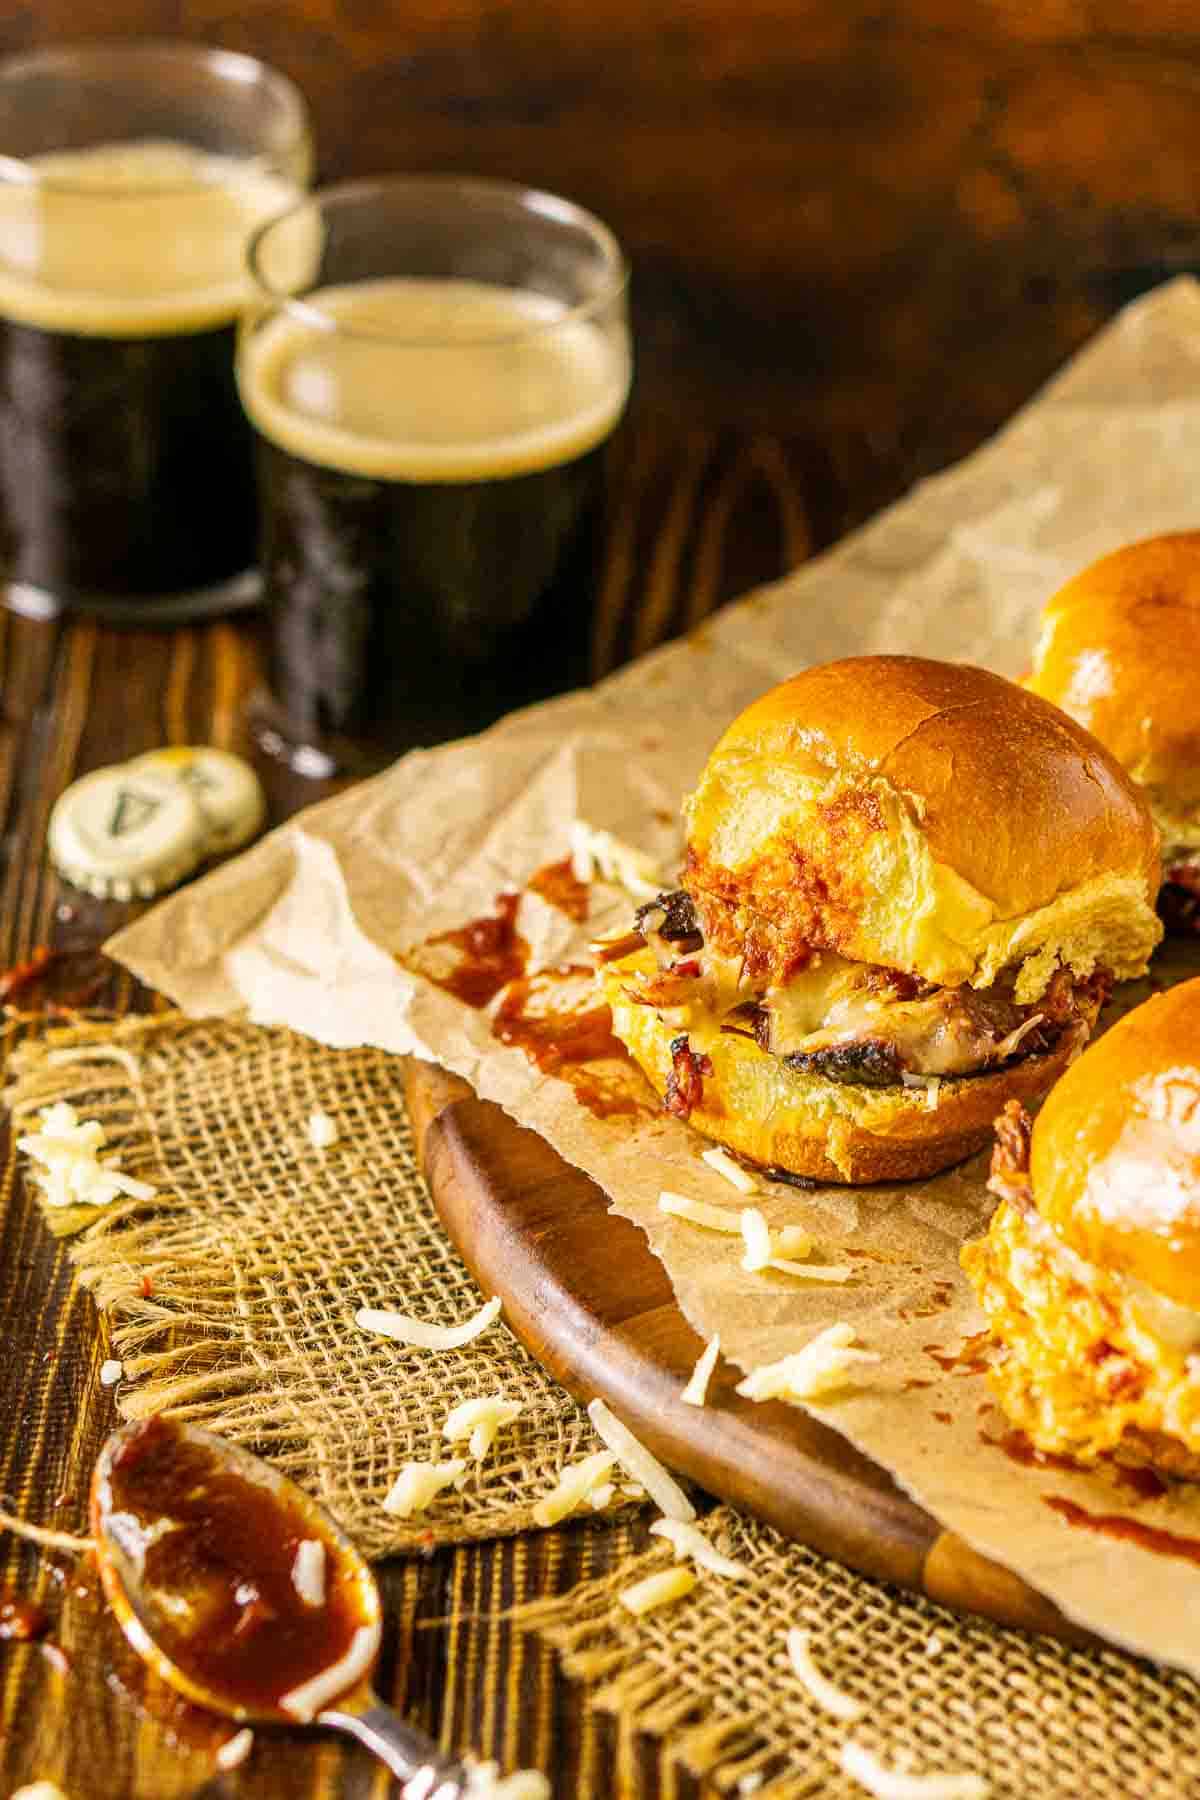 The brisket sliders on a brown wooden plate with a spoonful of BBQ sauce in front and two beers in the background.